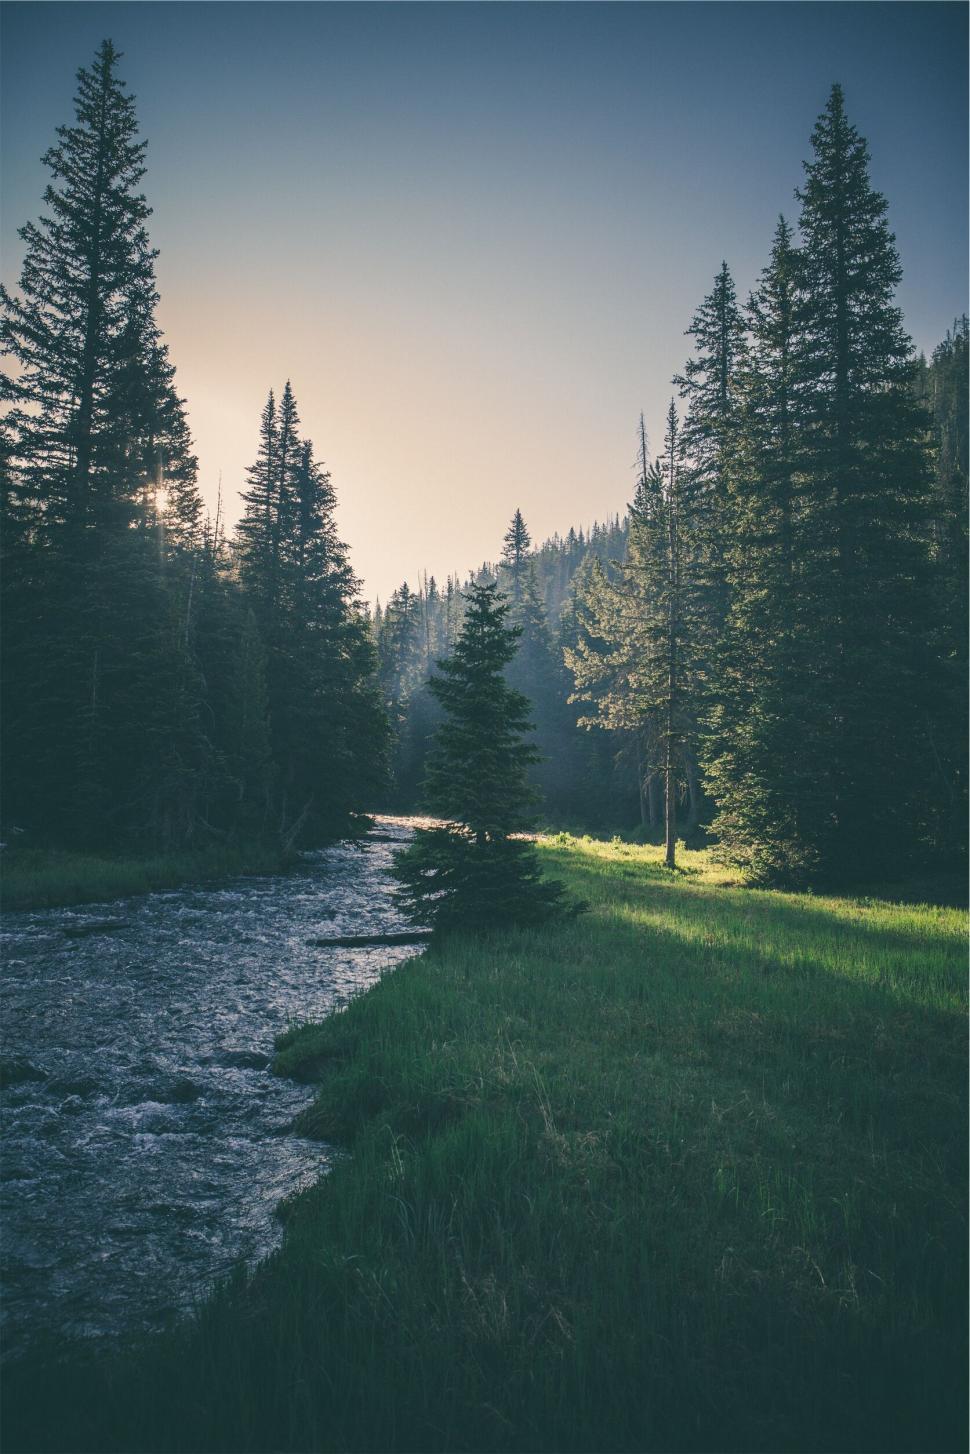 Free Image of Forest riverbed with sunlight peeking through trees 